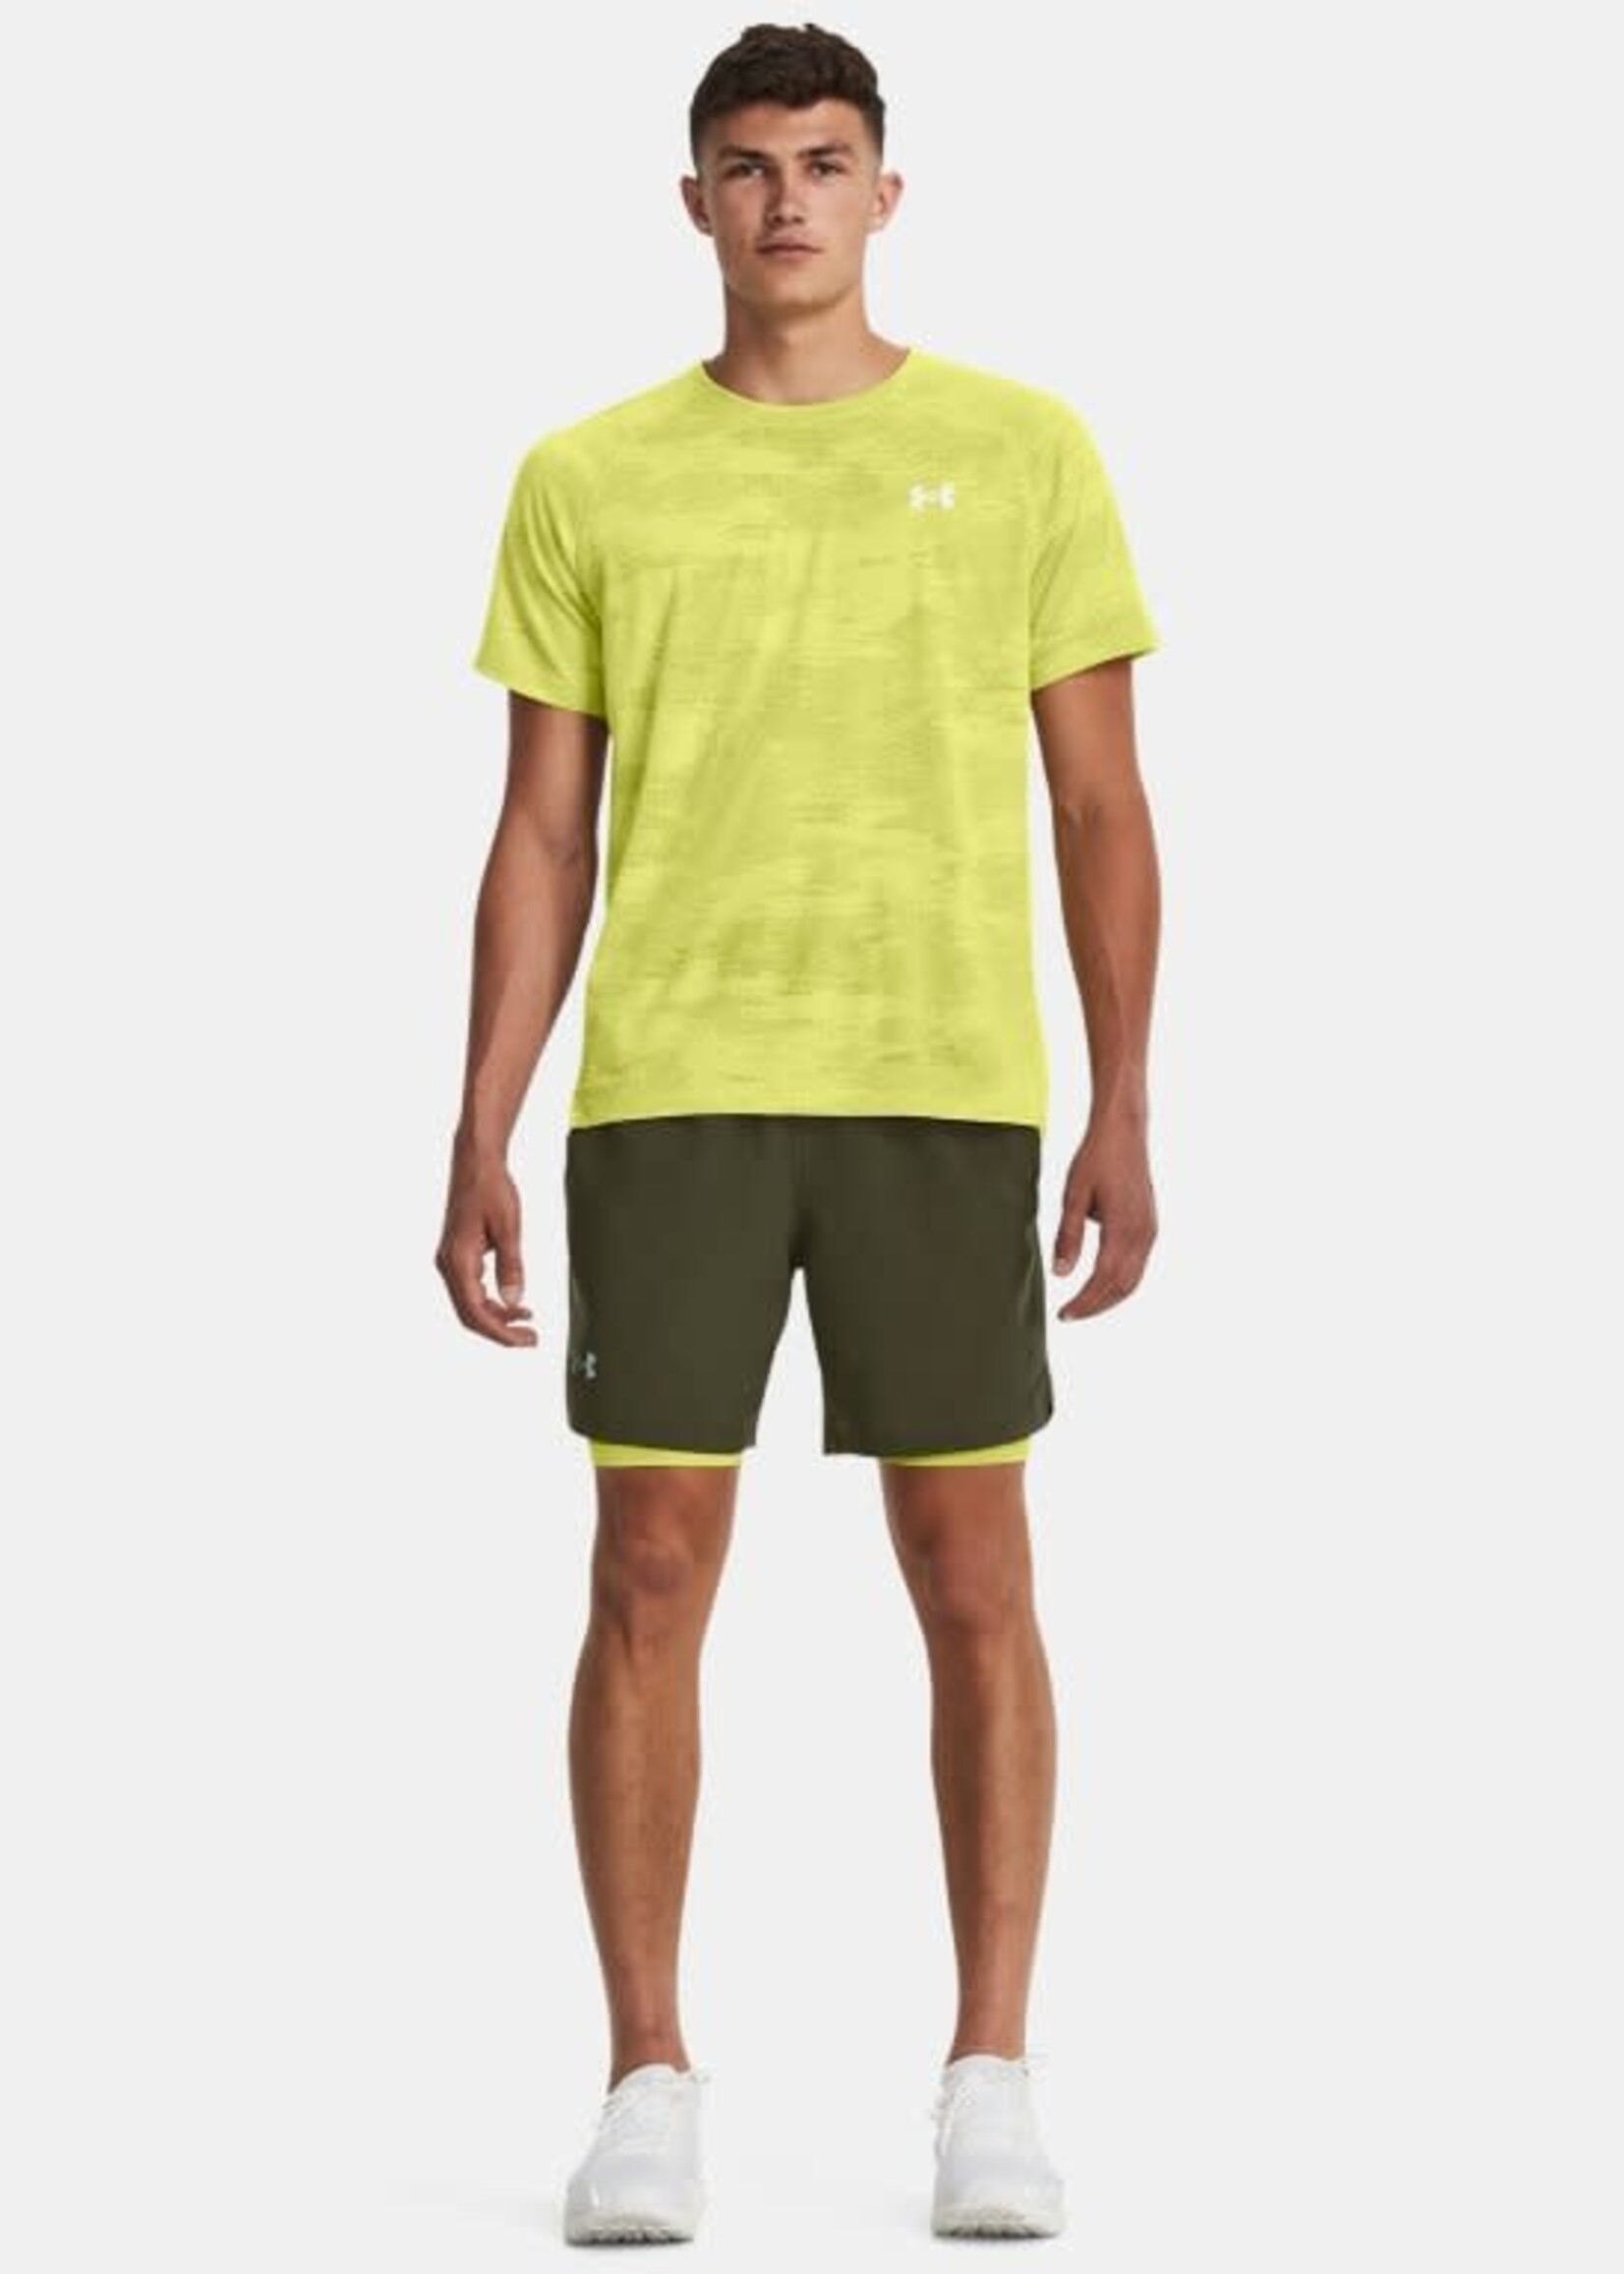 Under Armour Ua Launch 7'' 2-In-1 Short-Grn